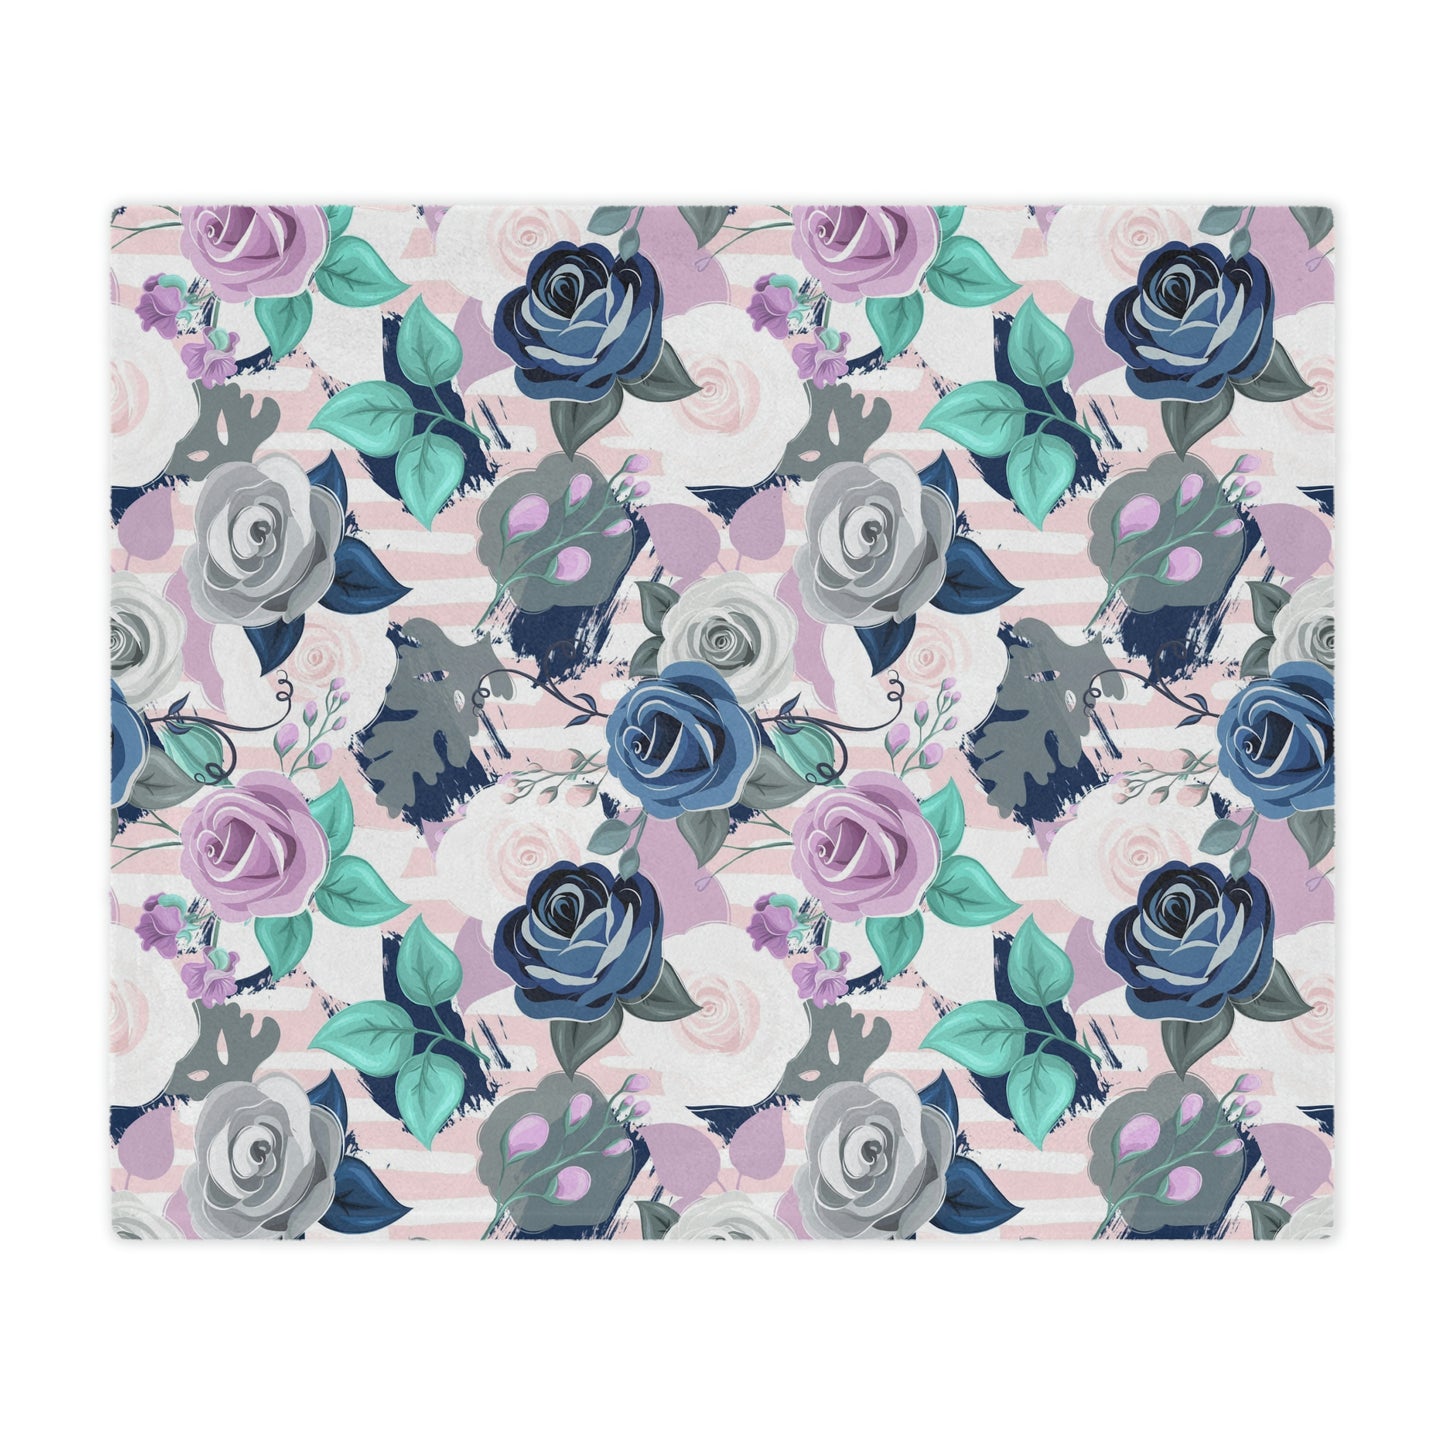 pink and purple blanket lying on a bed, blue roses pattern on a plush blanket, purple and blue rose print throw blanket lying next to pillows on a bed